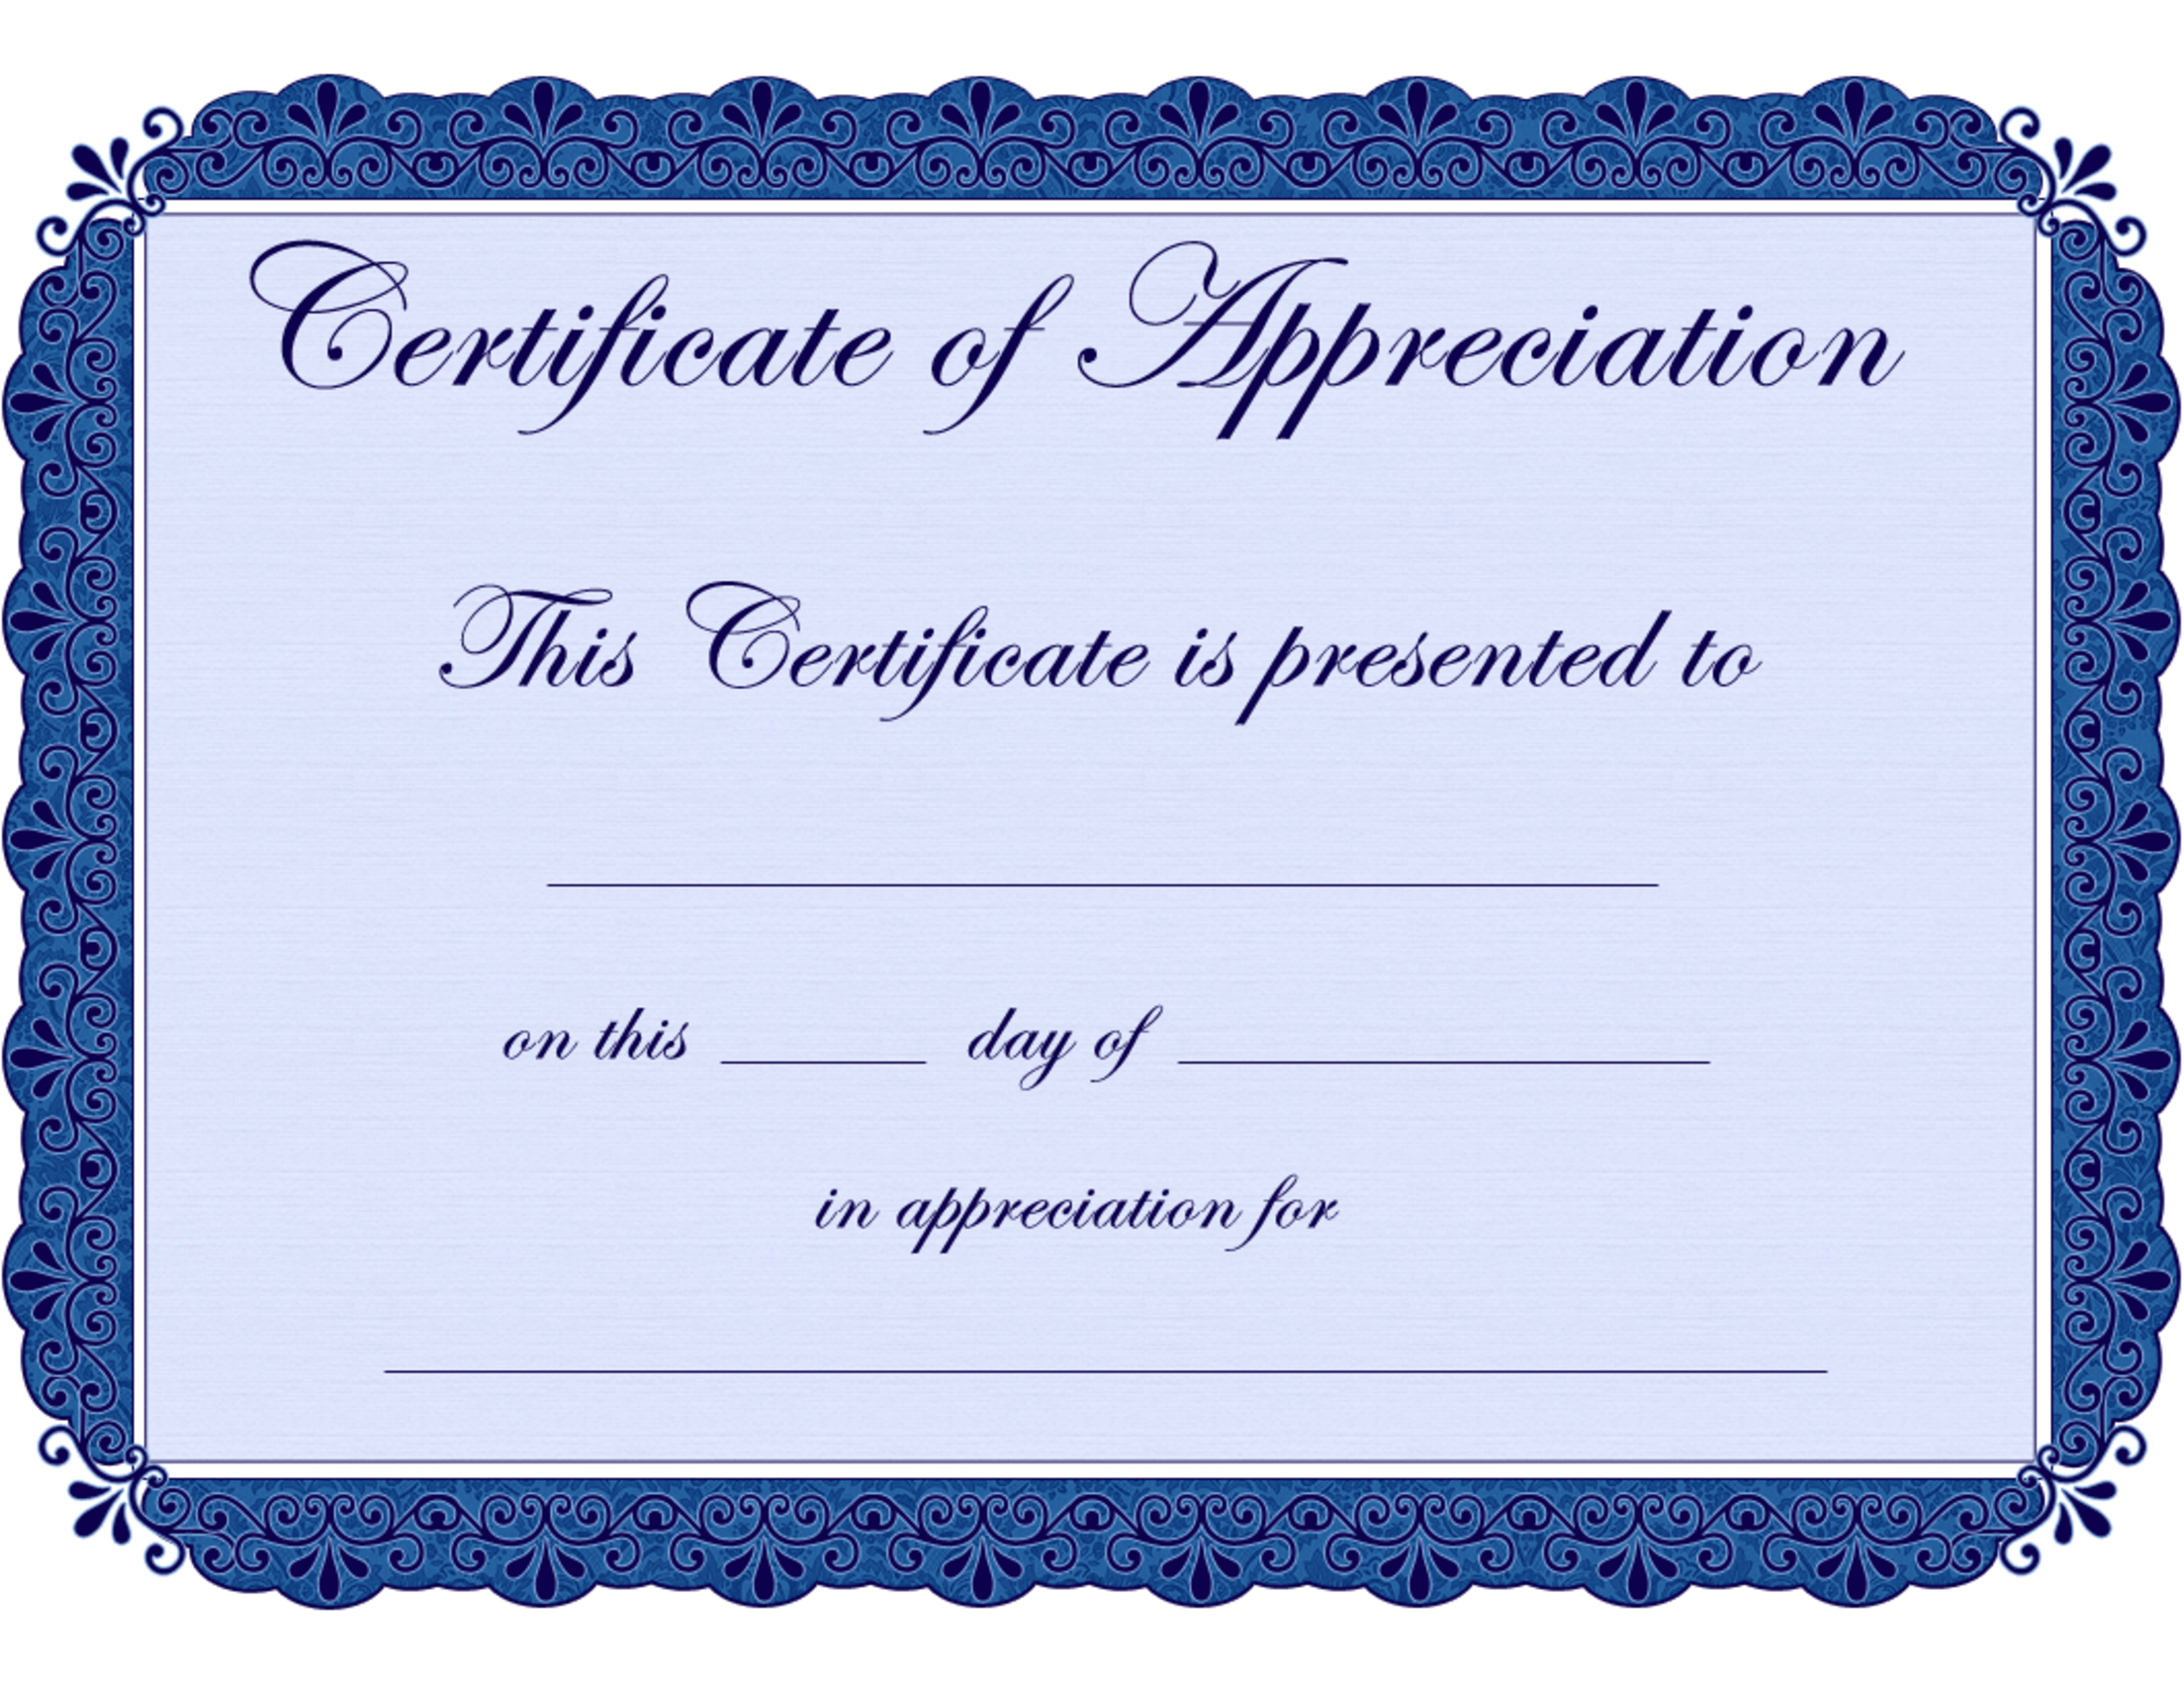 Free Printable Certificates Certificate Of Appreciation With Free Certificate Of Excellence Template